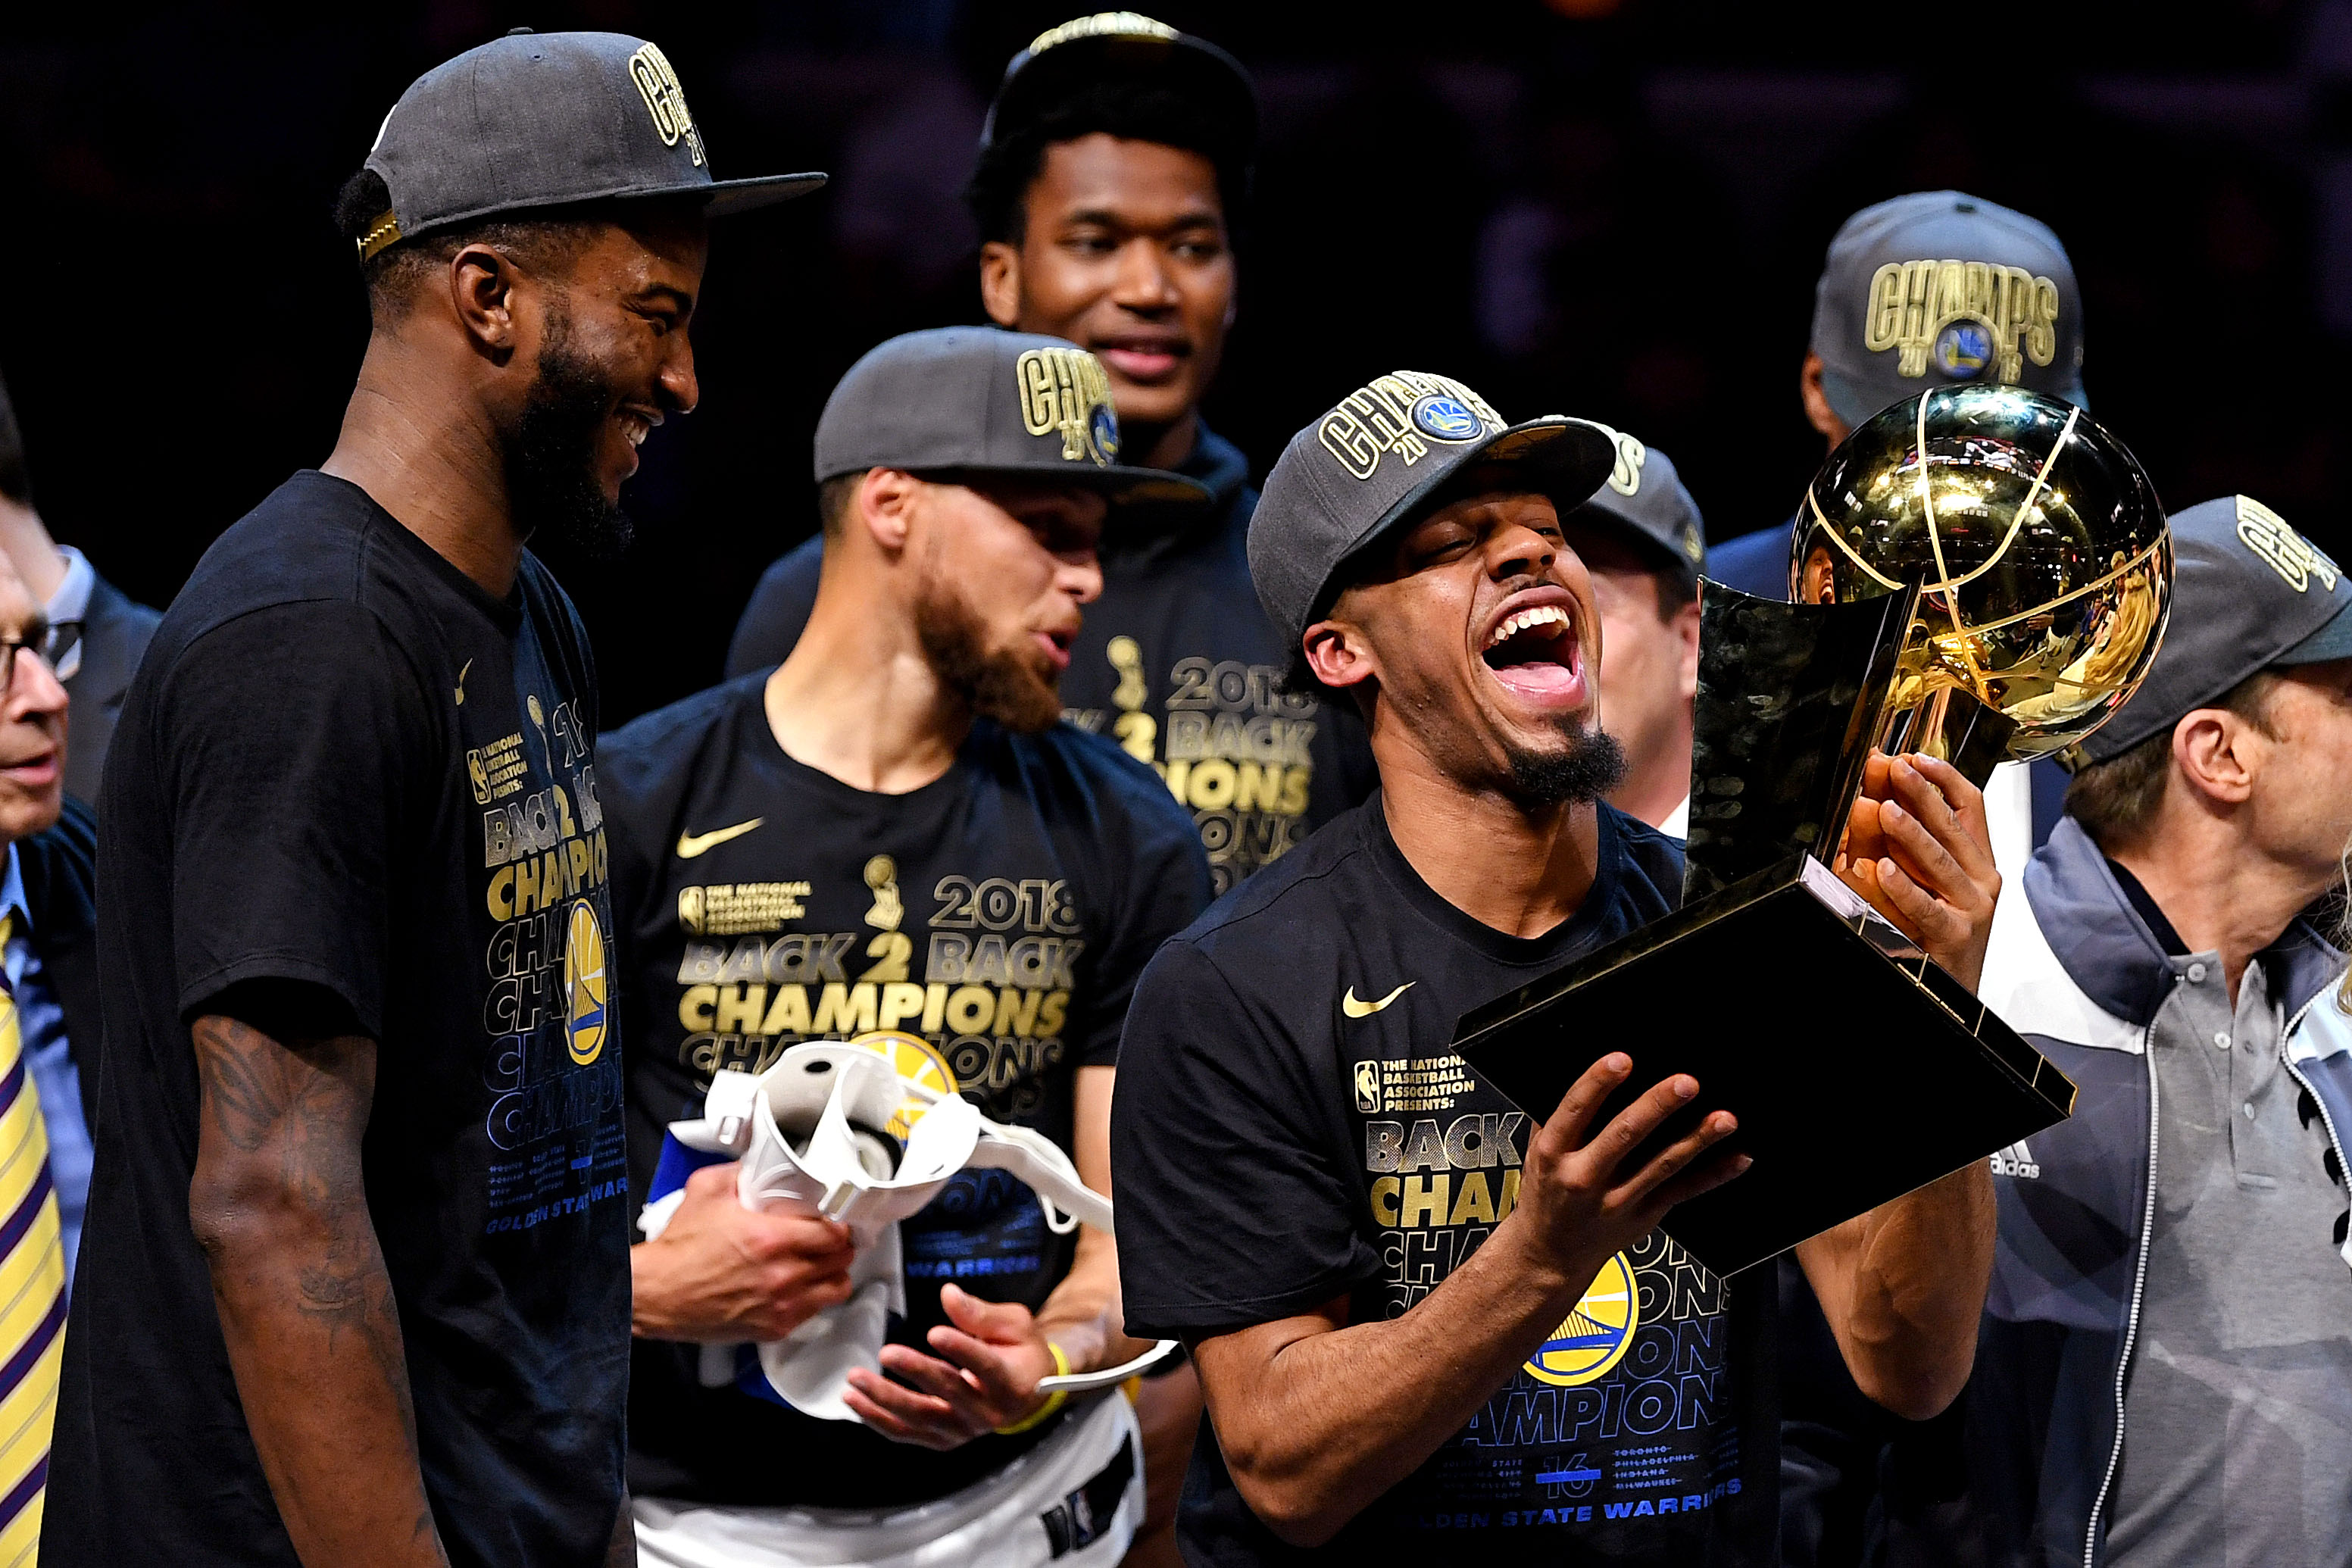 Nick Young is so happy to win his first title with the Warriors